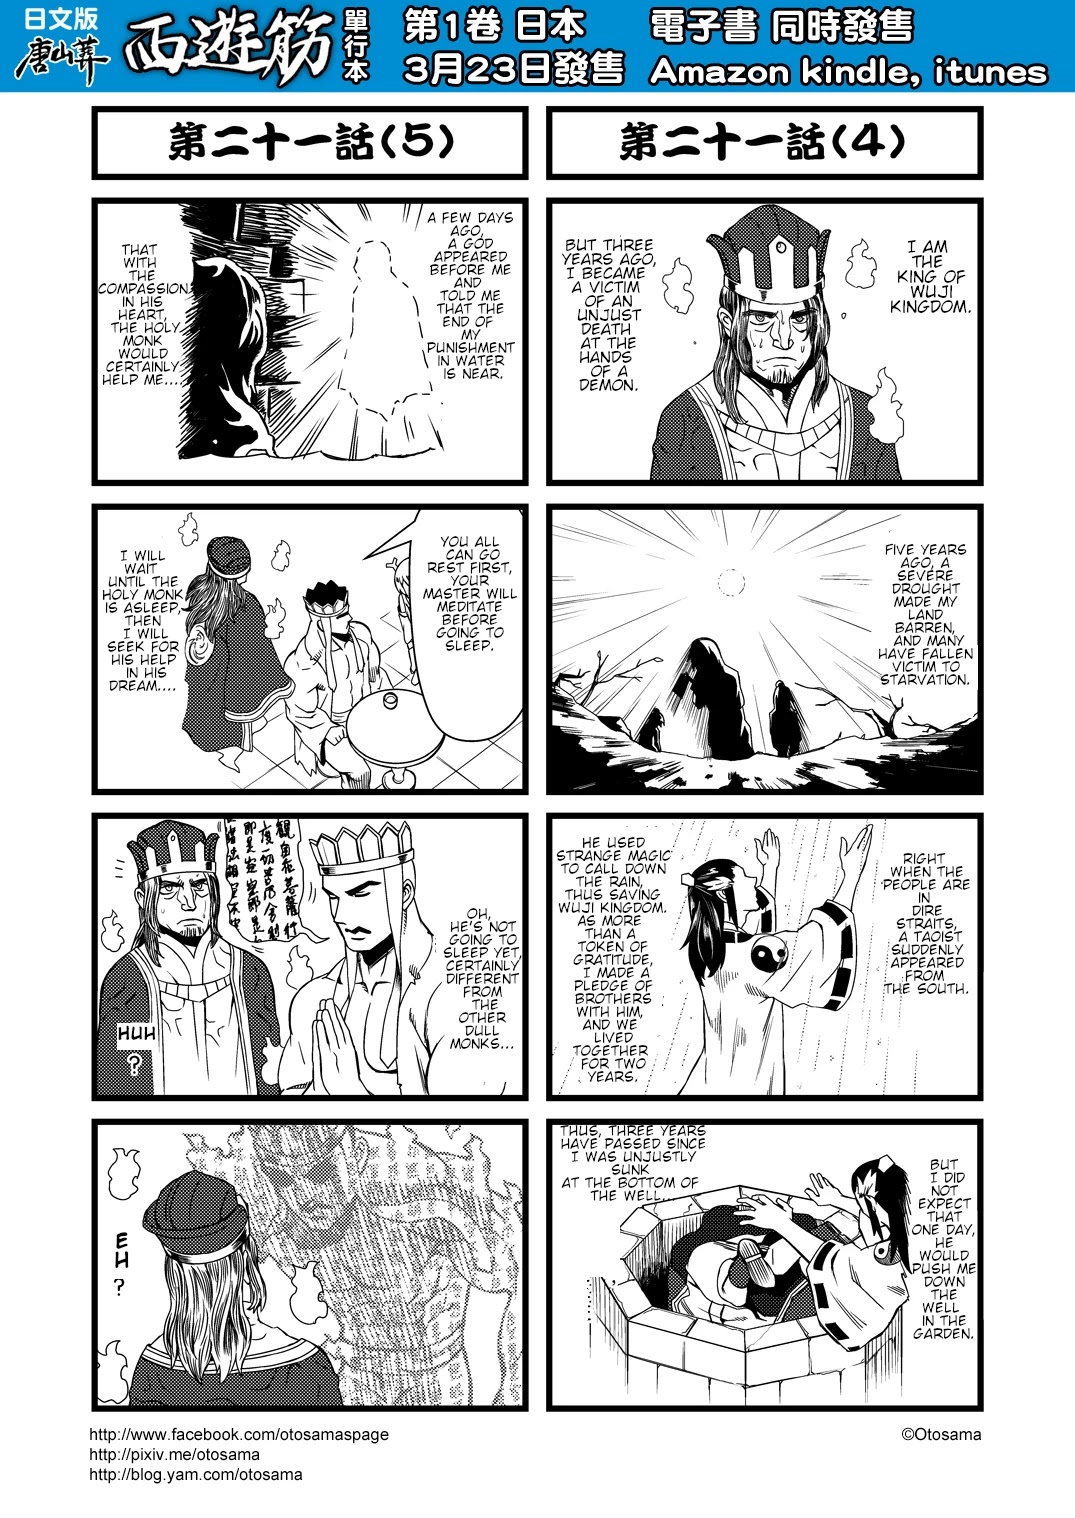 Tang Hill Burial - Journey To The West Irresponsible Anything Goes Edition Chapter 21: Attack On Wuji Kingdom's Palace - Picture 3